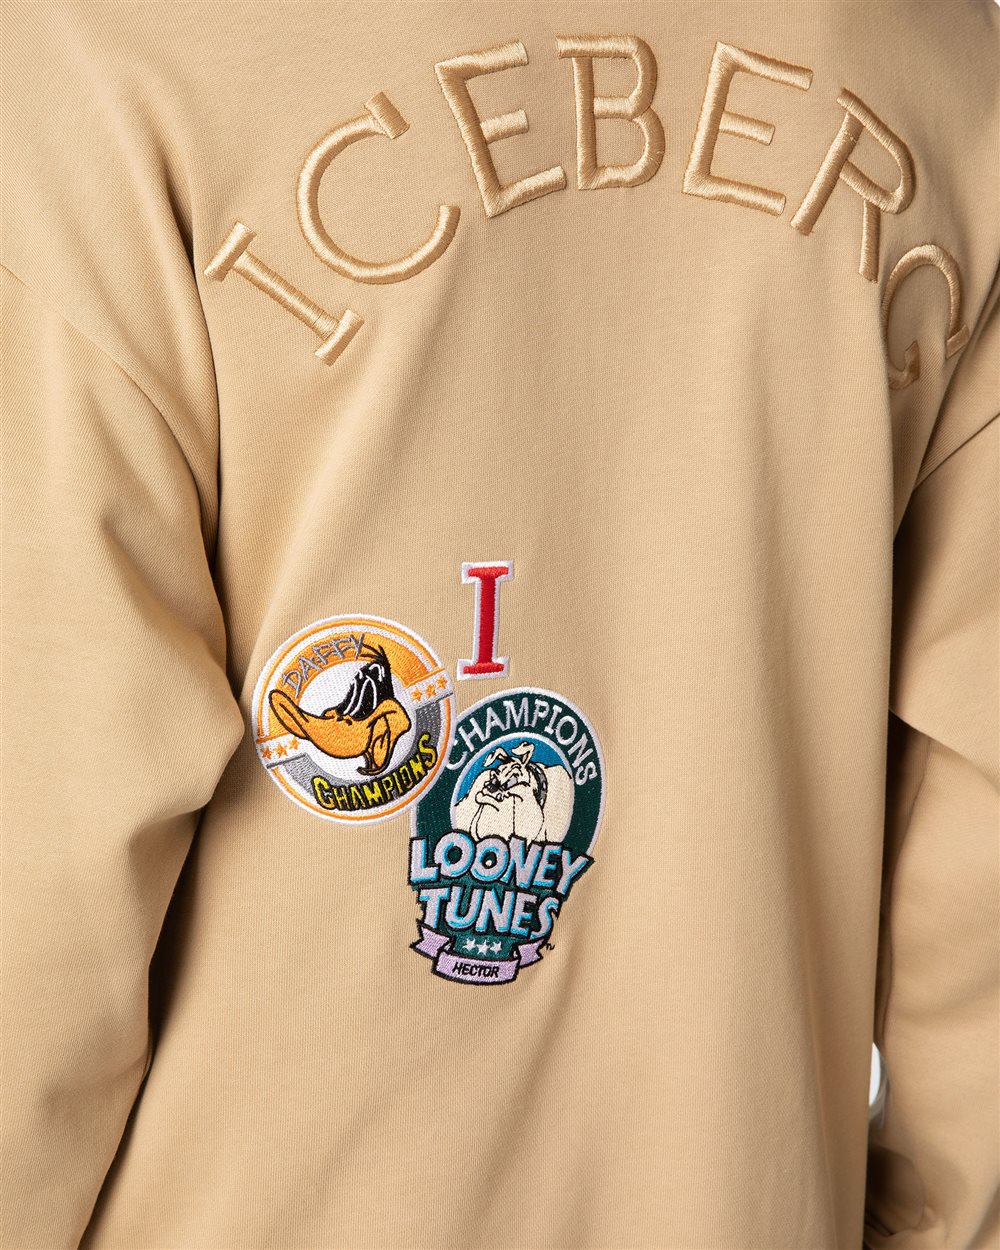 Hooded sweatshirt with Looney Tunes patches | Iceberg